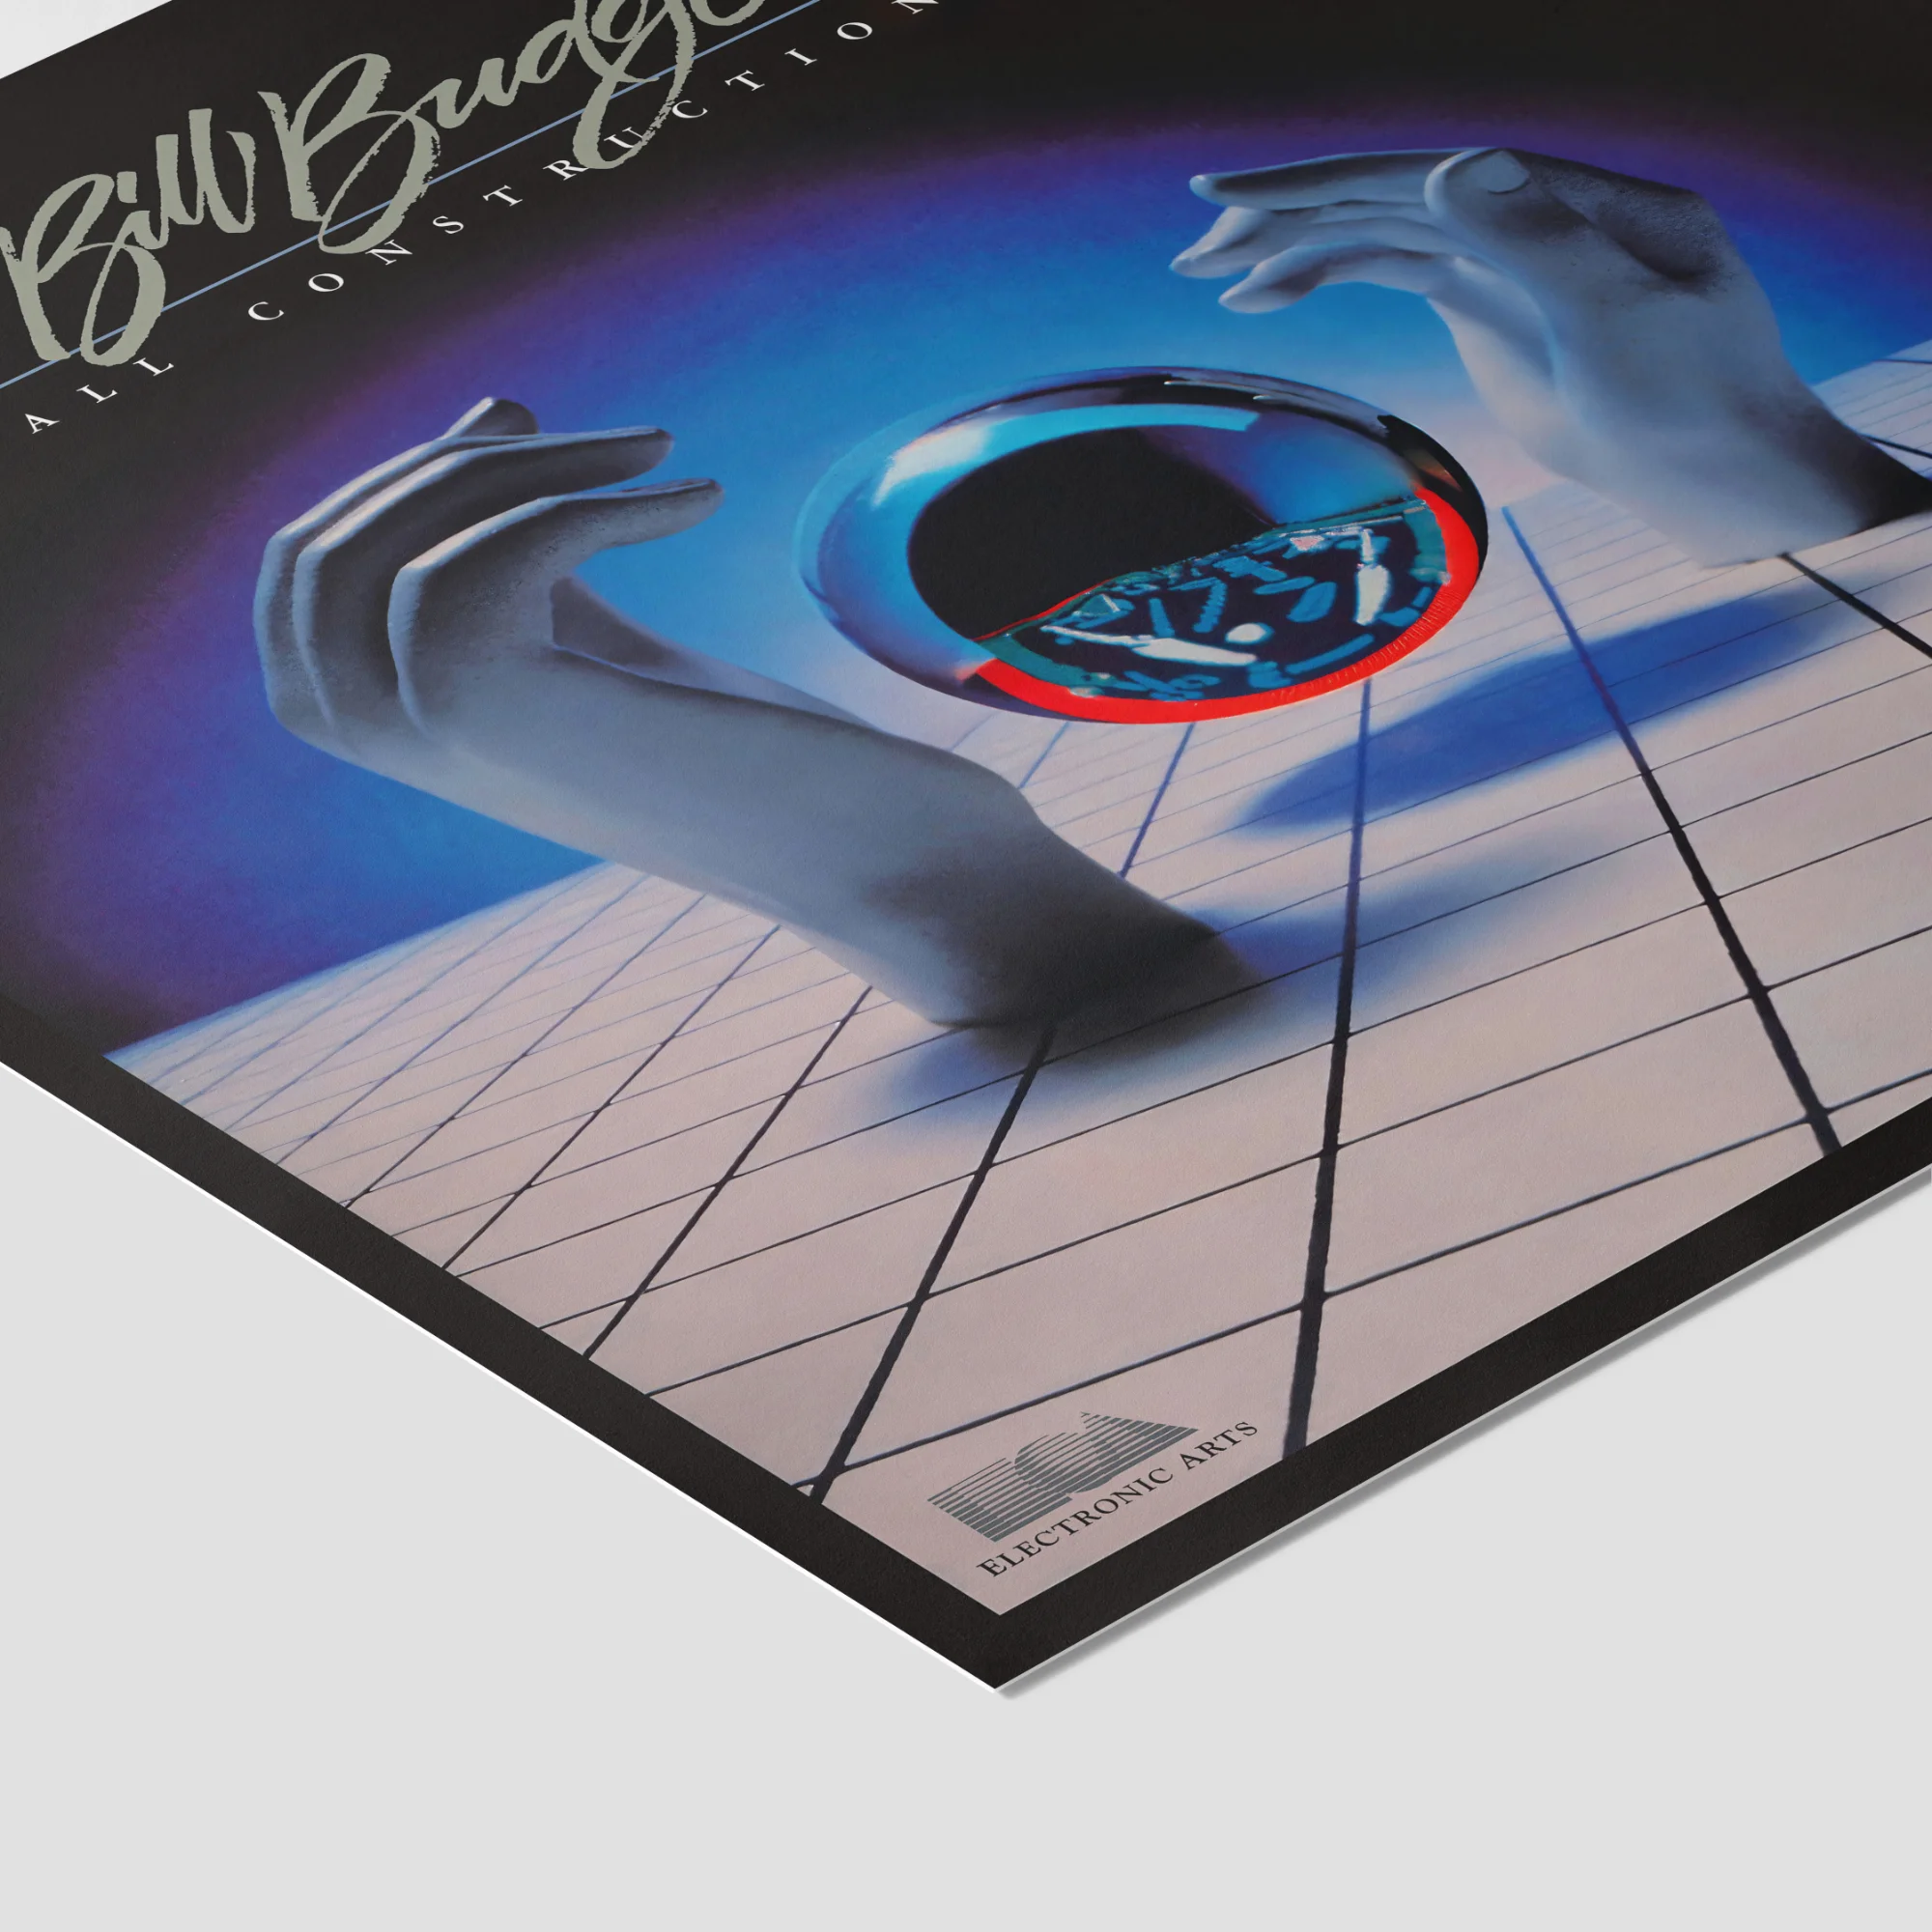 Hands manipulating a sphere over a grid in promotional artwork.